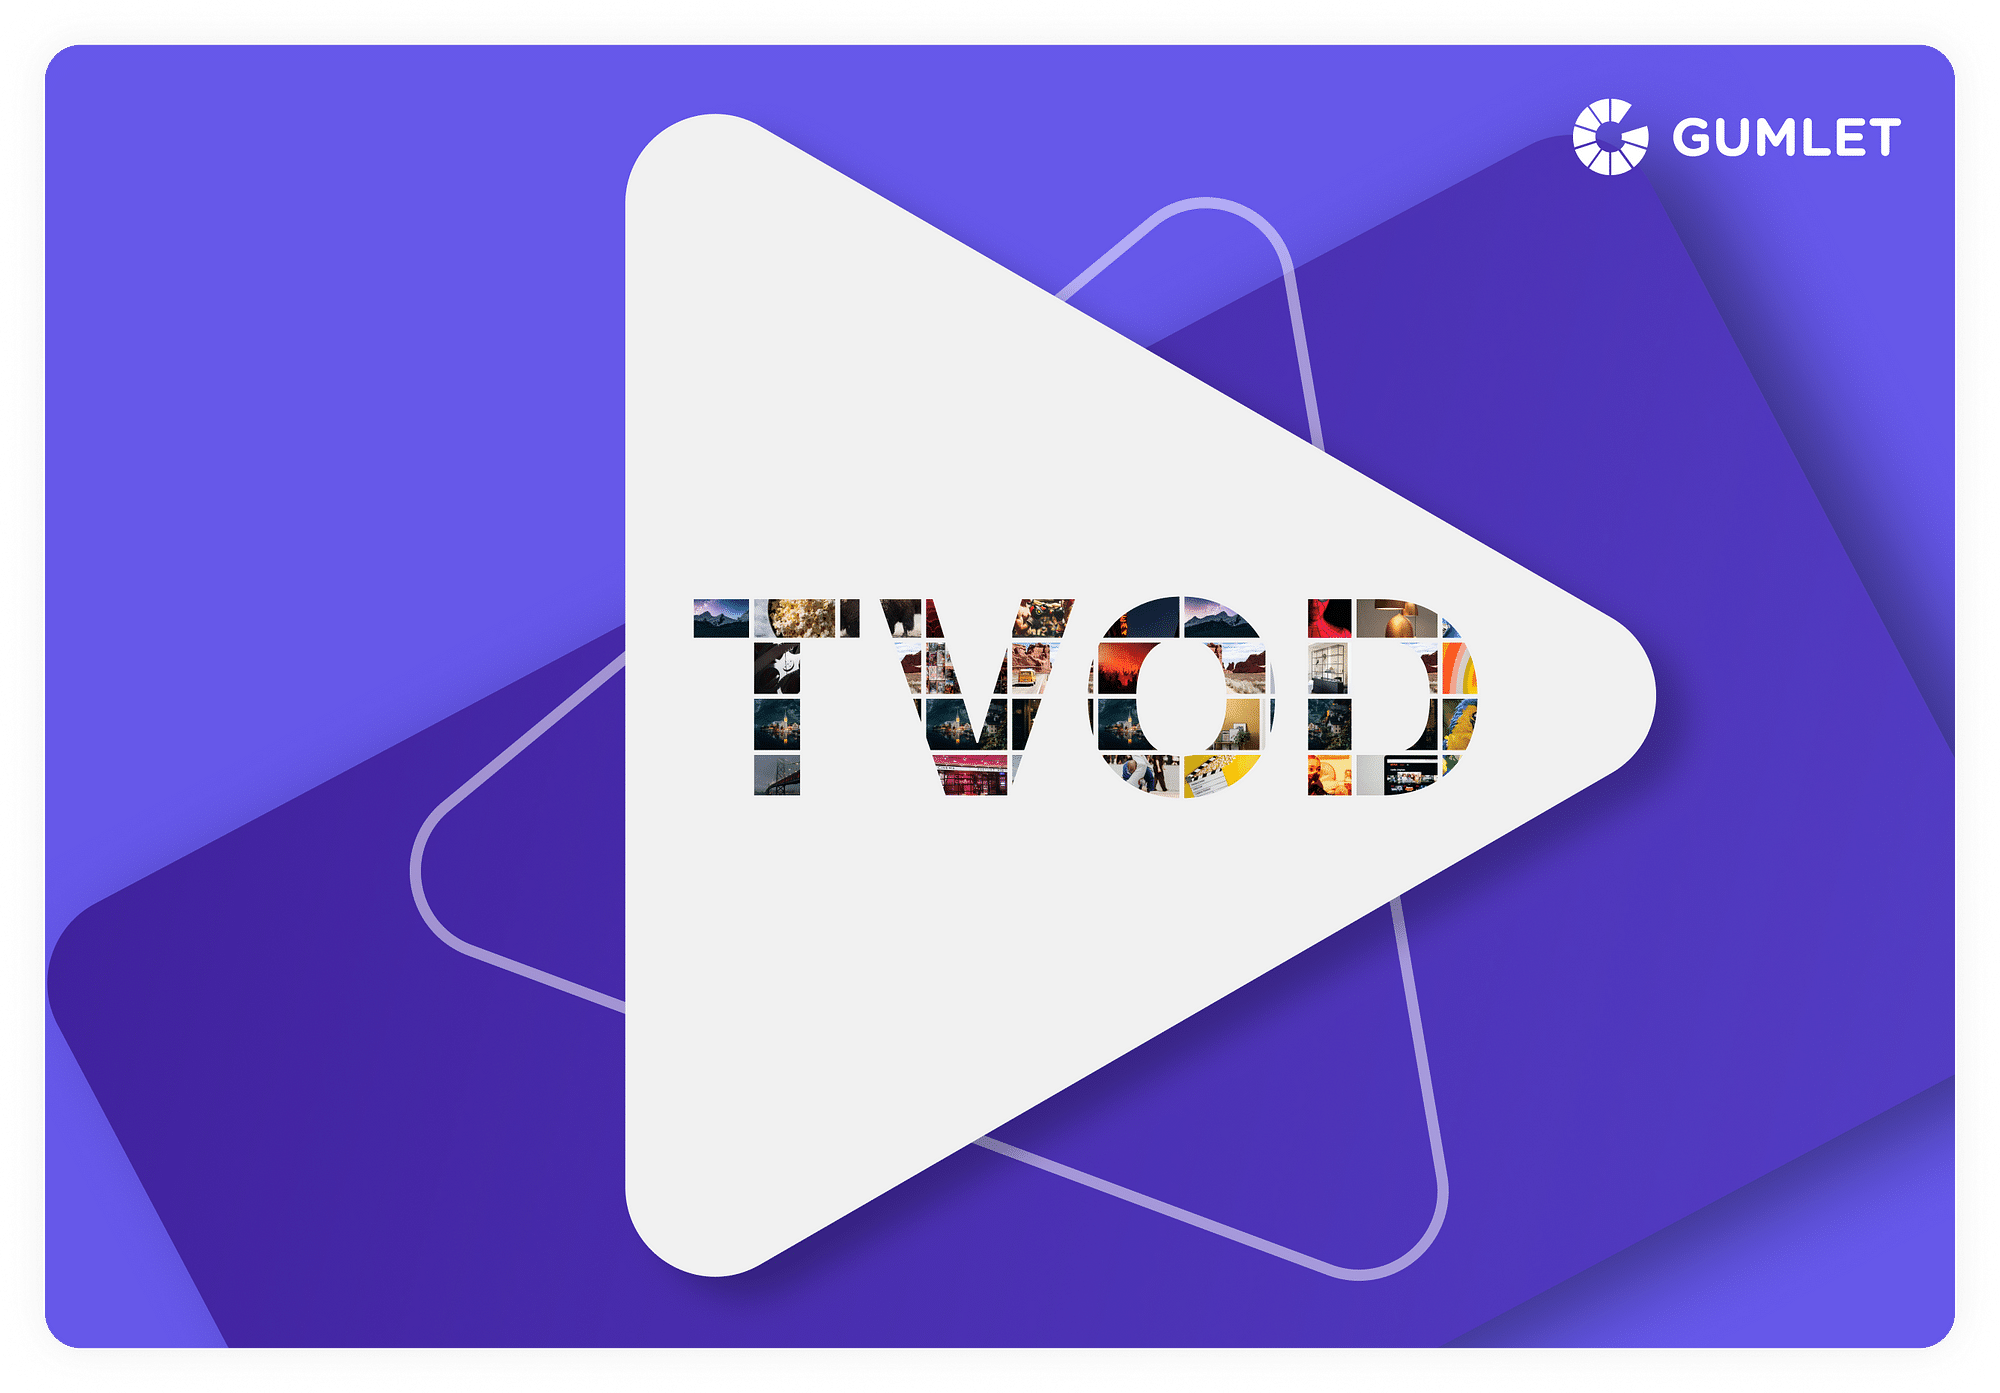 TVOD - Definition, Types, Pros and Cons and More